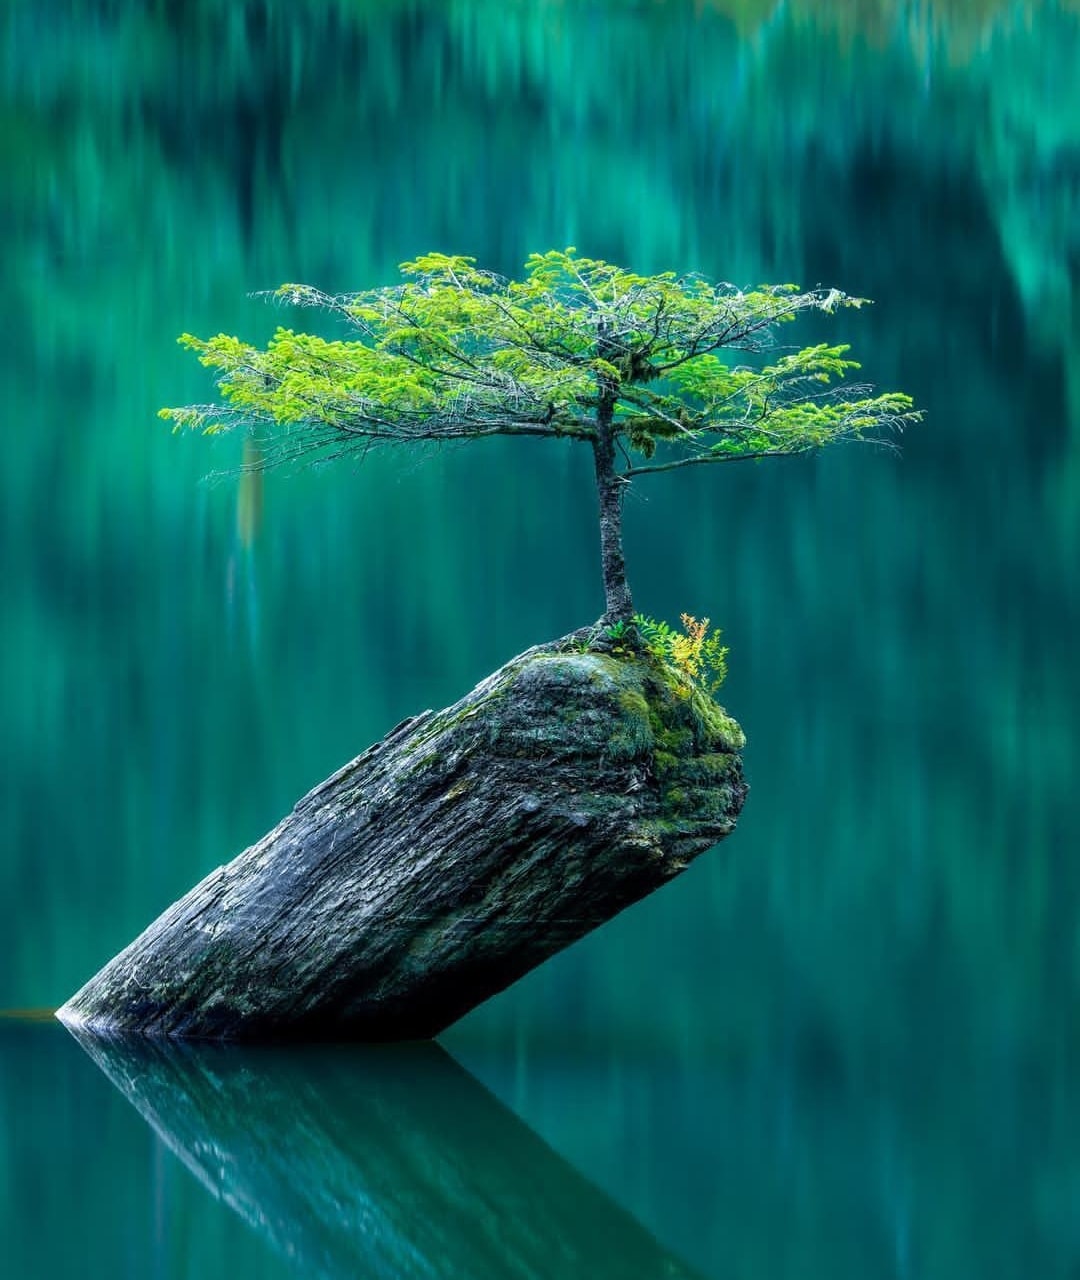 May be an image of nature, tree, body of water and text